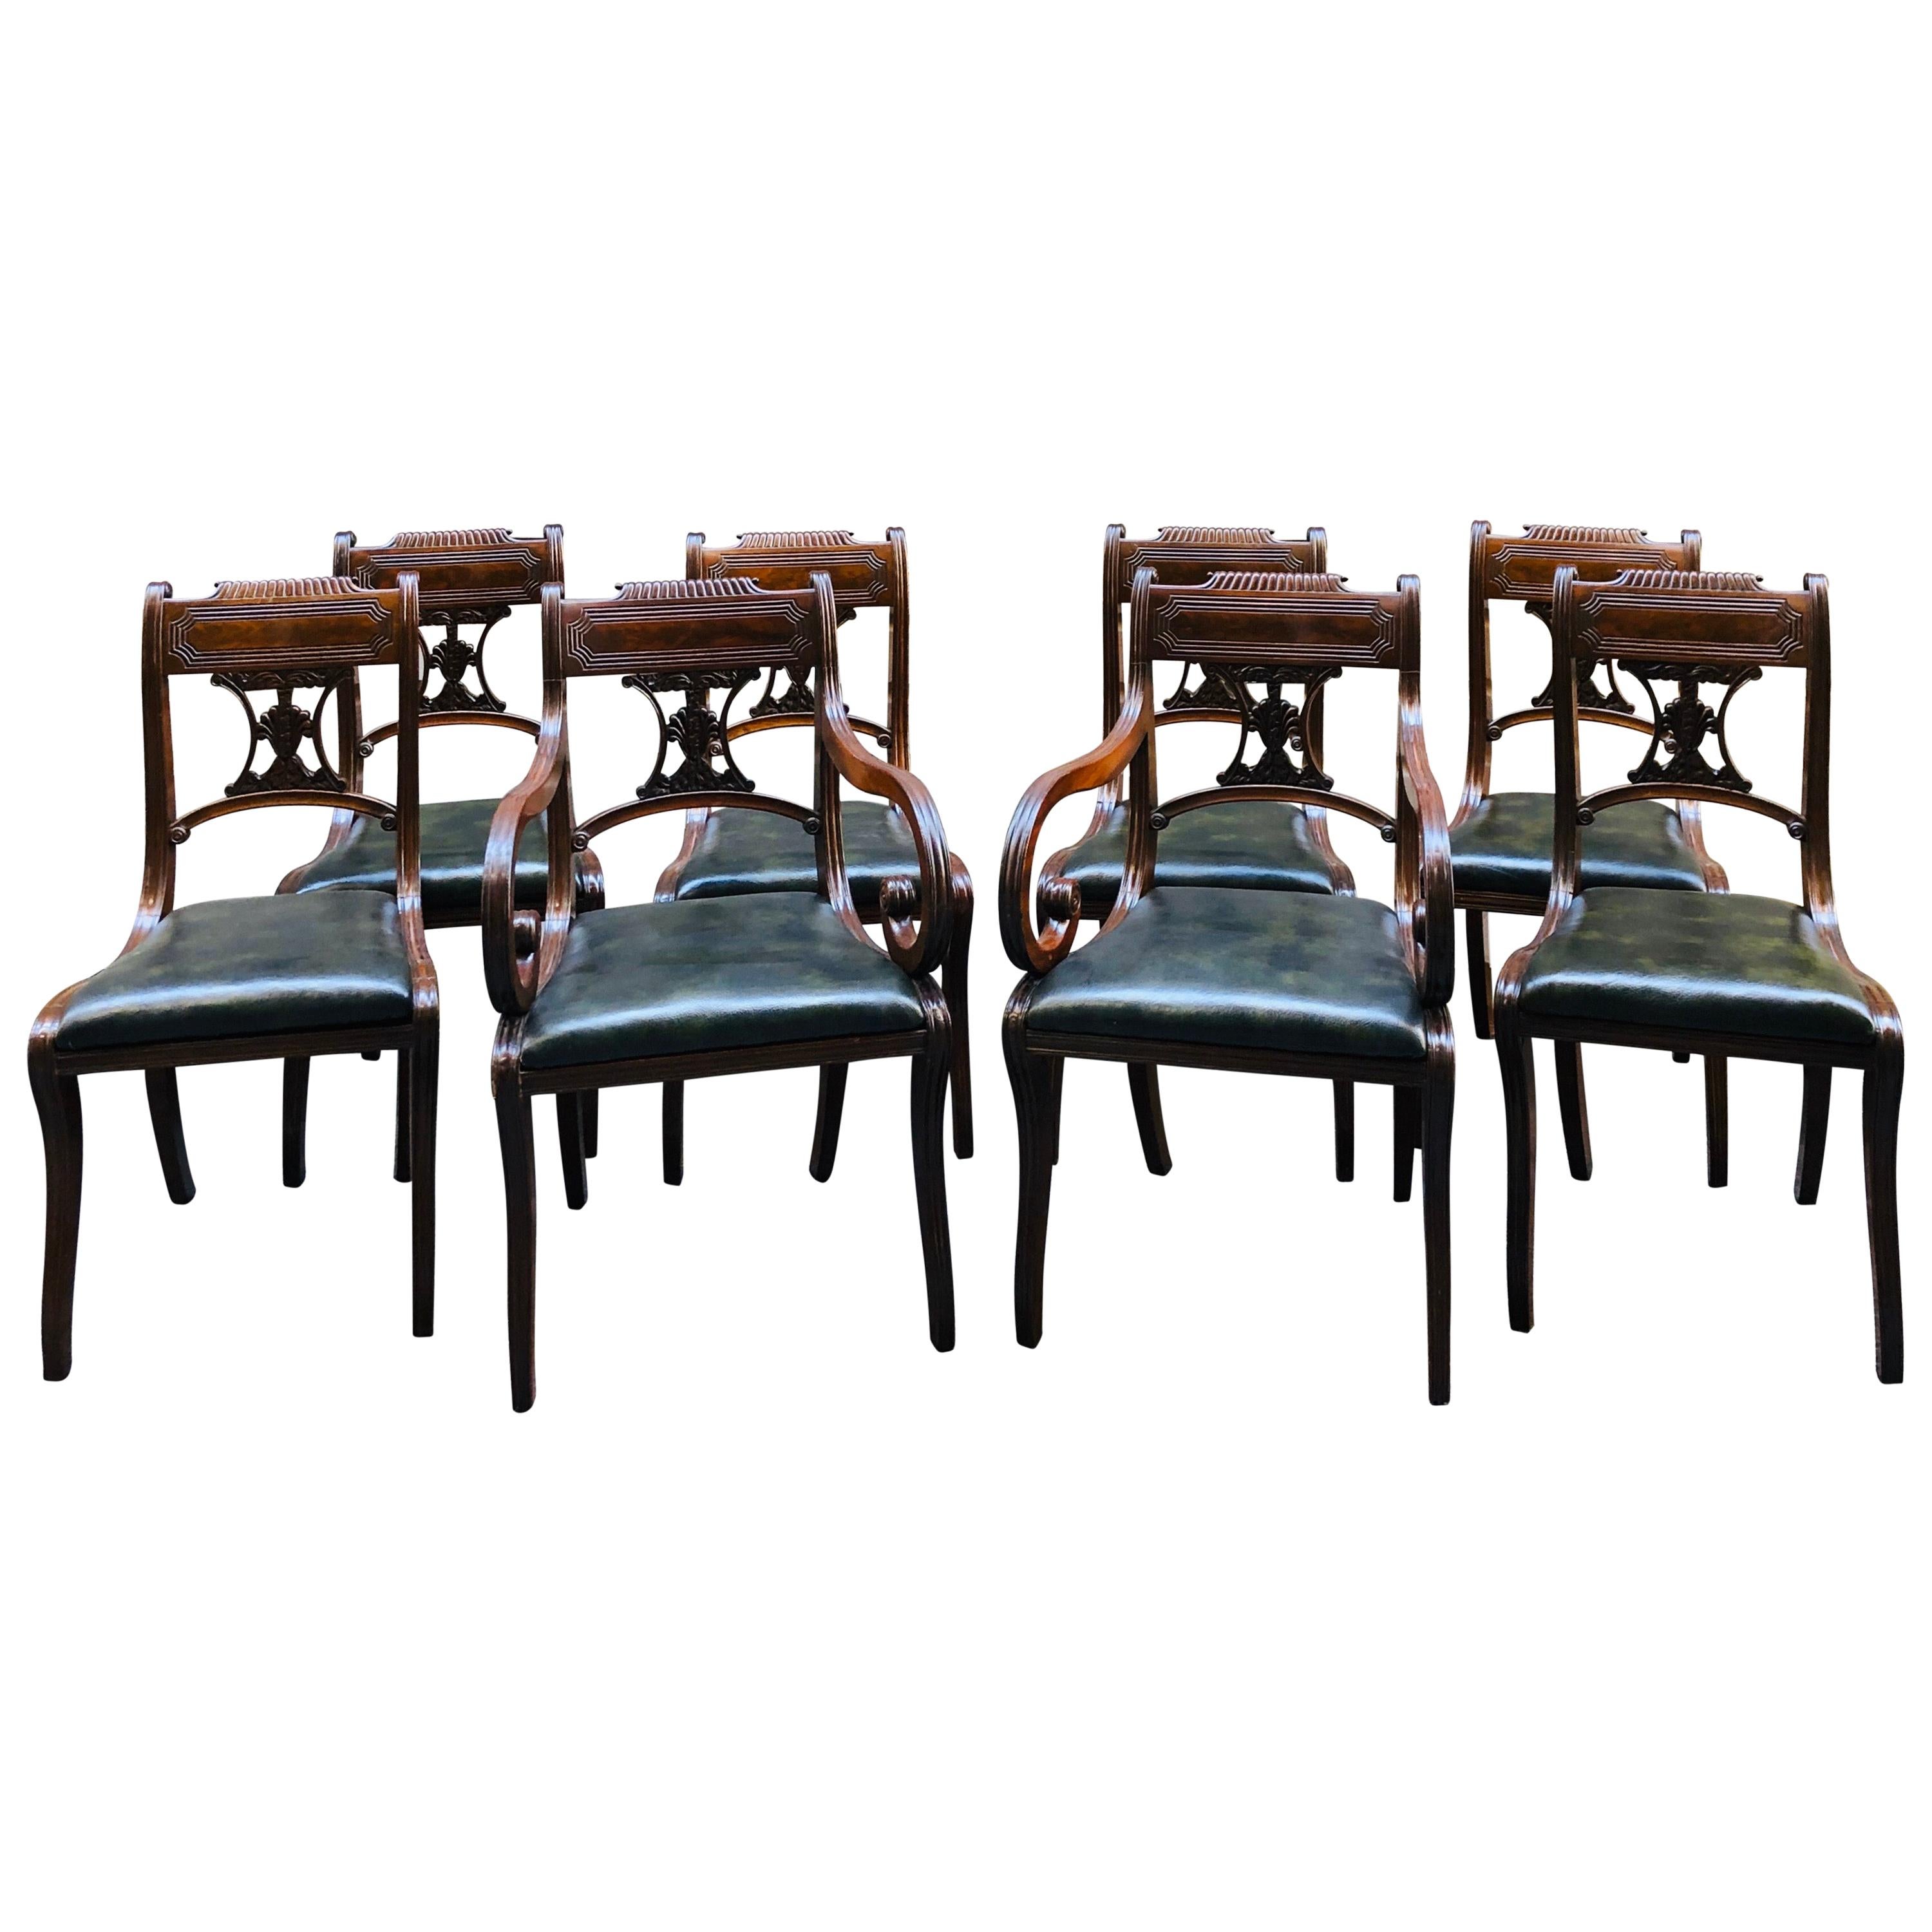 Important Set of Eight Regency Period Mahogany Dining Chairs, Early 19th Century